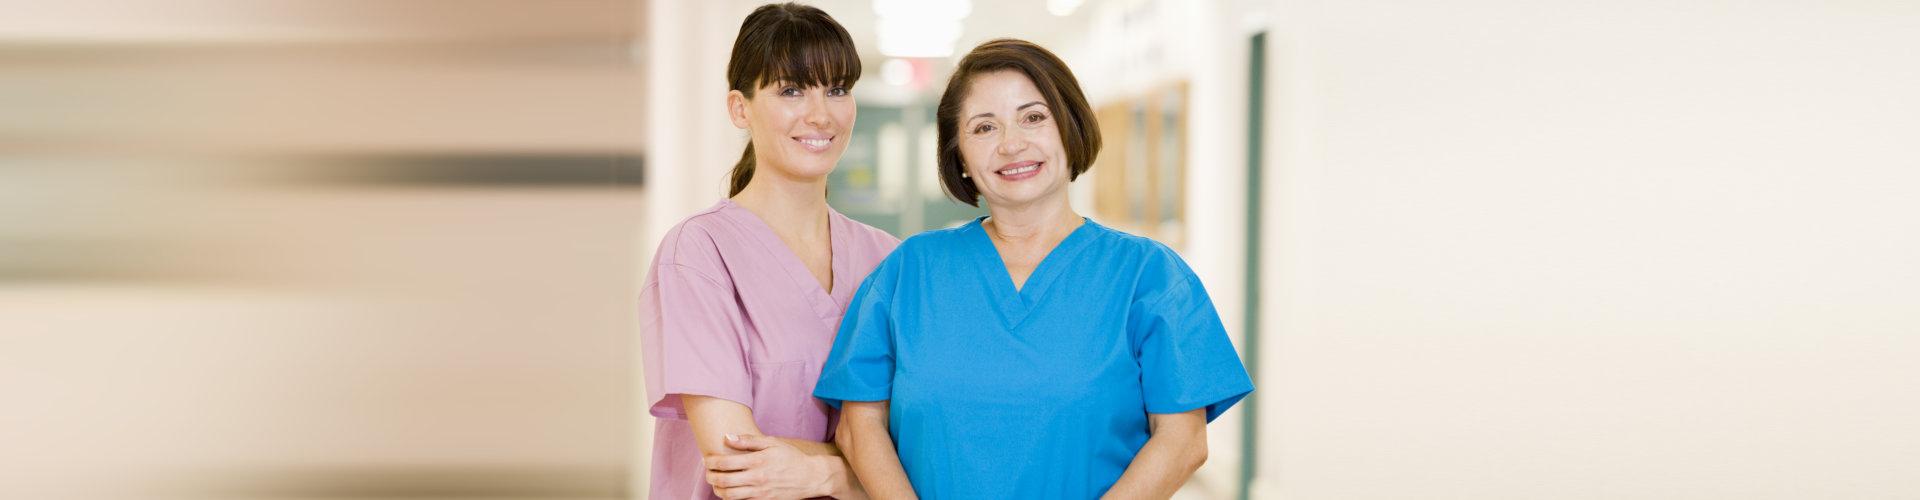 Two Female Nurses Standing In A Hospital Corridor Smiling